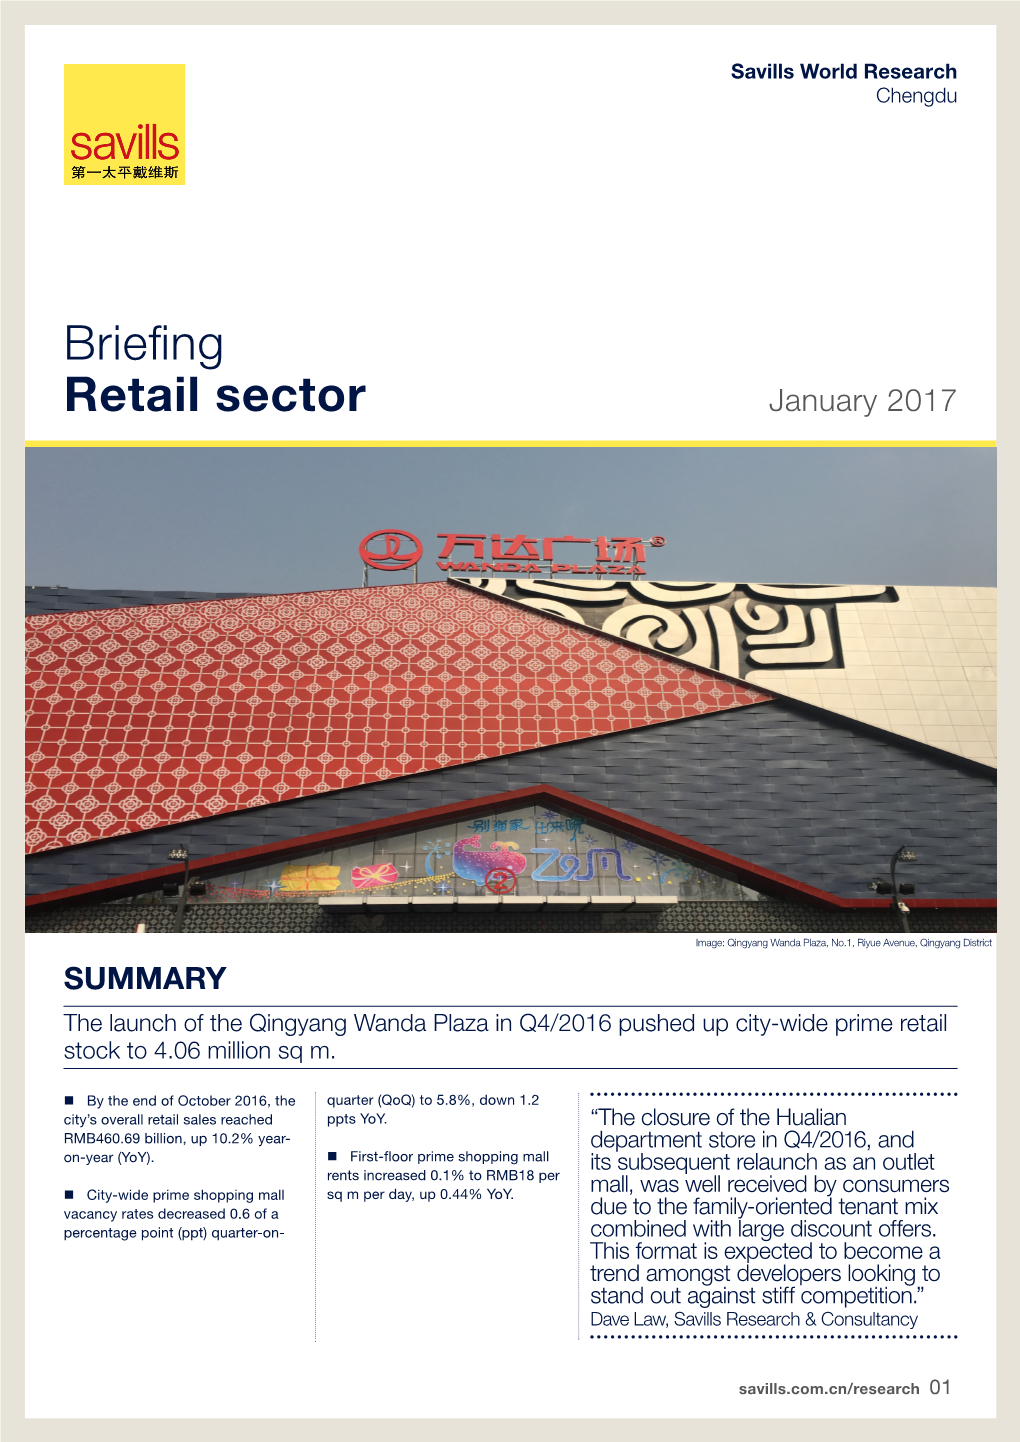 Briefing Retail Sector January 2017